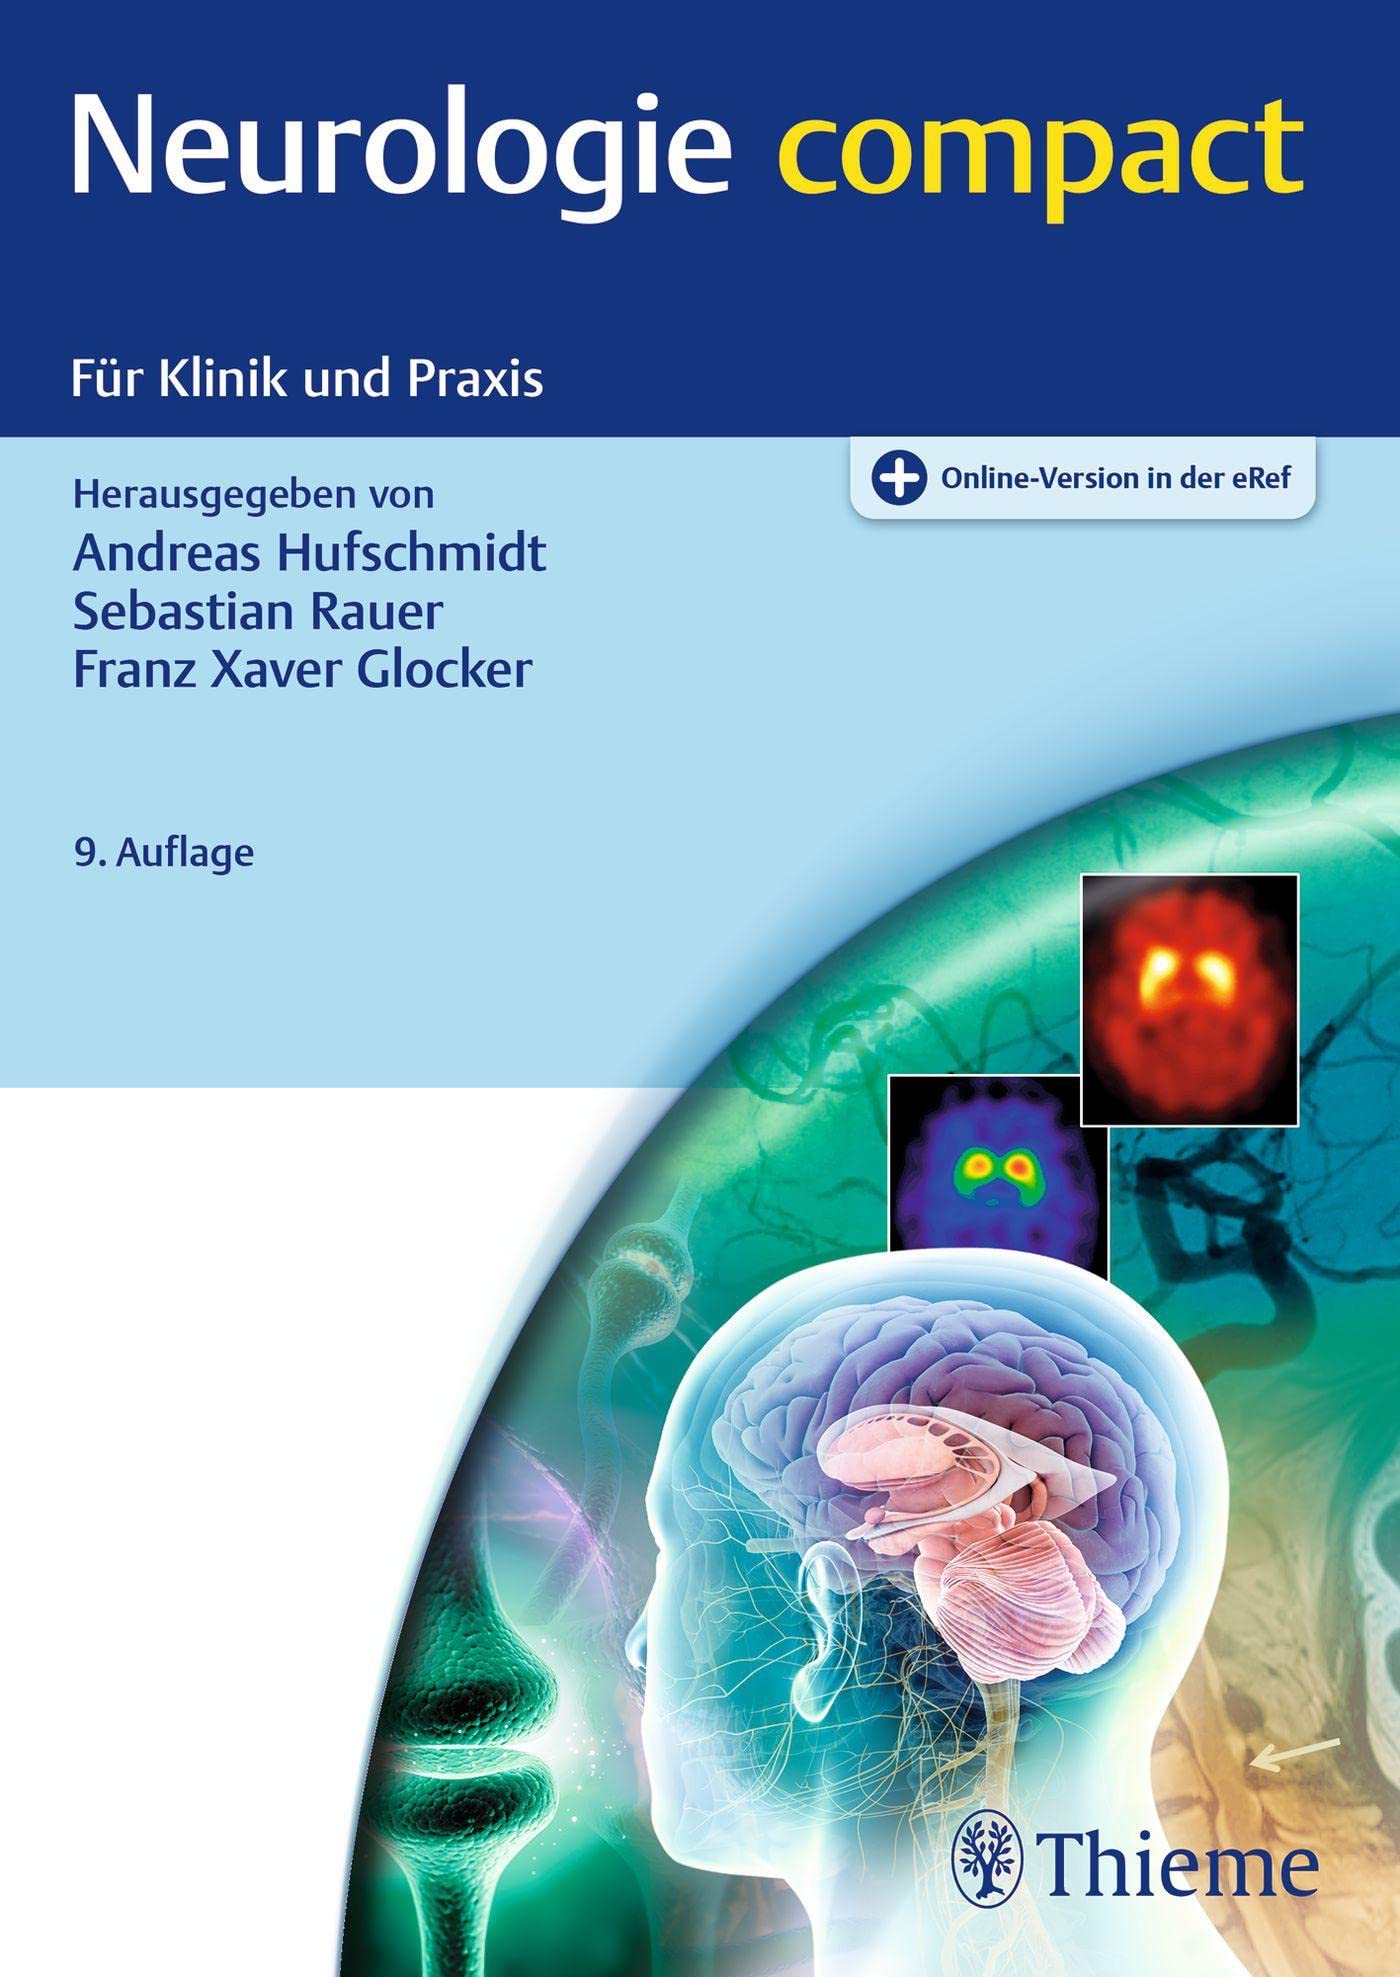 Neurologie compact, 9th edition by German Edition